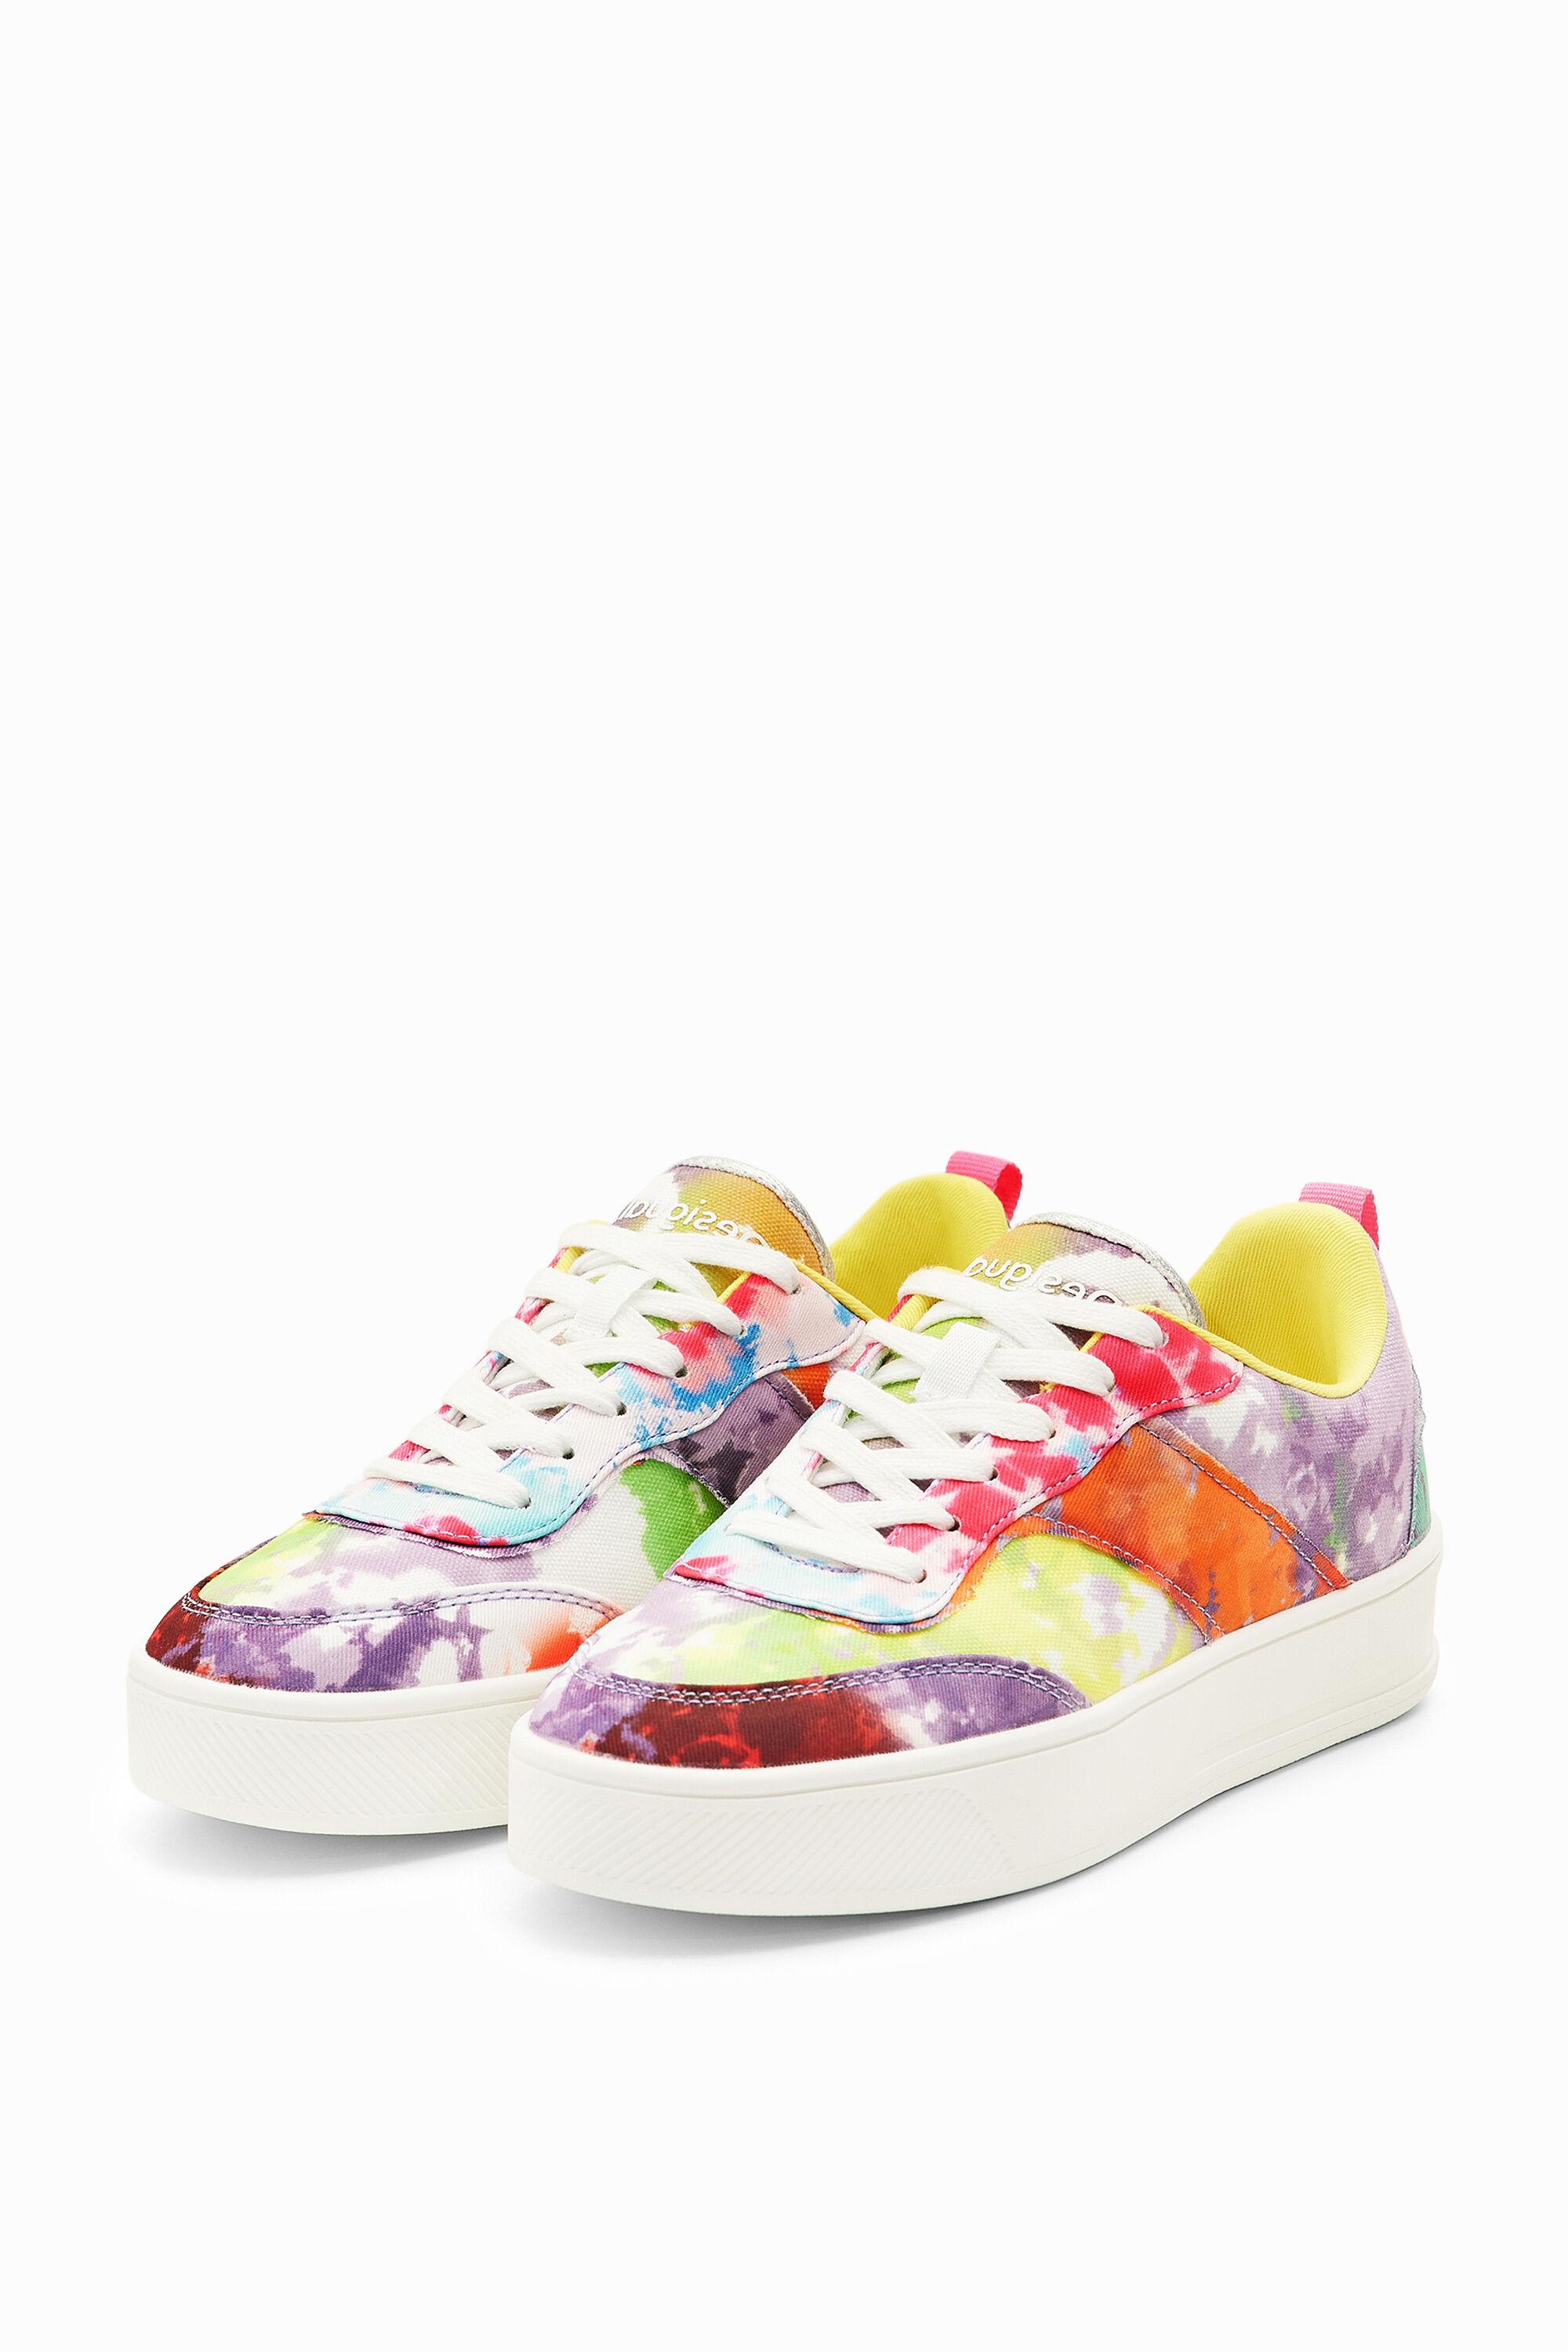 Desigual Watercolour Patchwork Platform Sneakers in White | Lyst